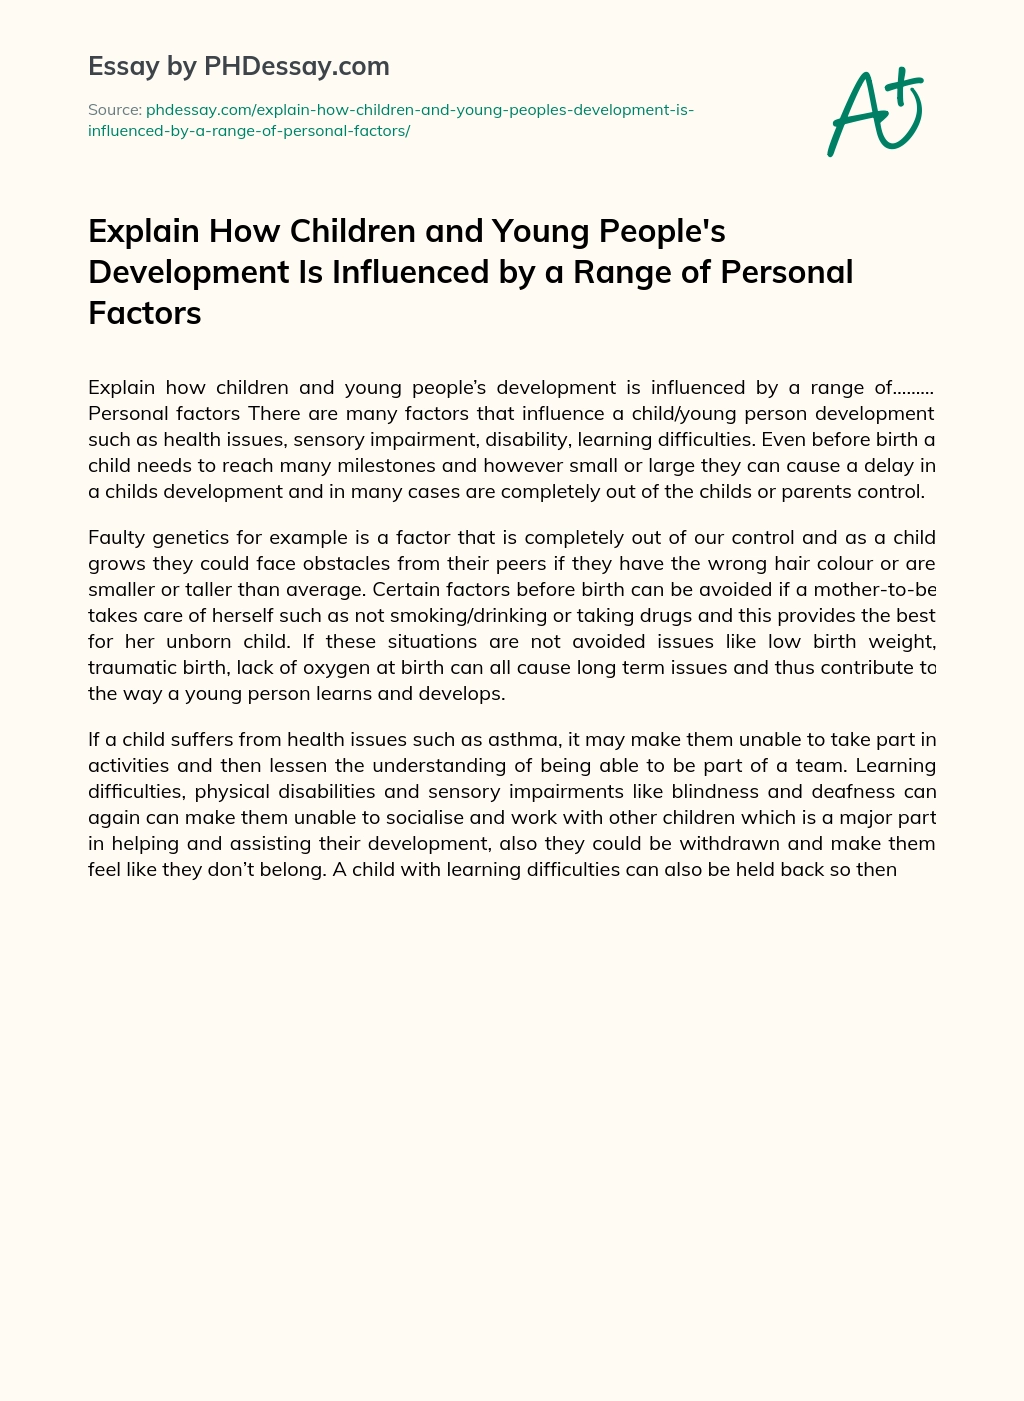 Factors Affecting Children’s Development: Personal Factors and Their Impact on Growth and Learning essay